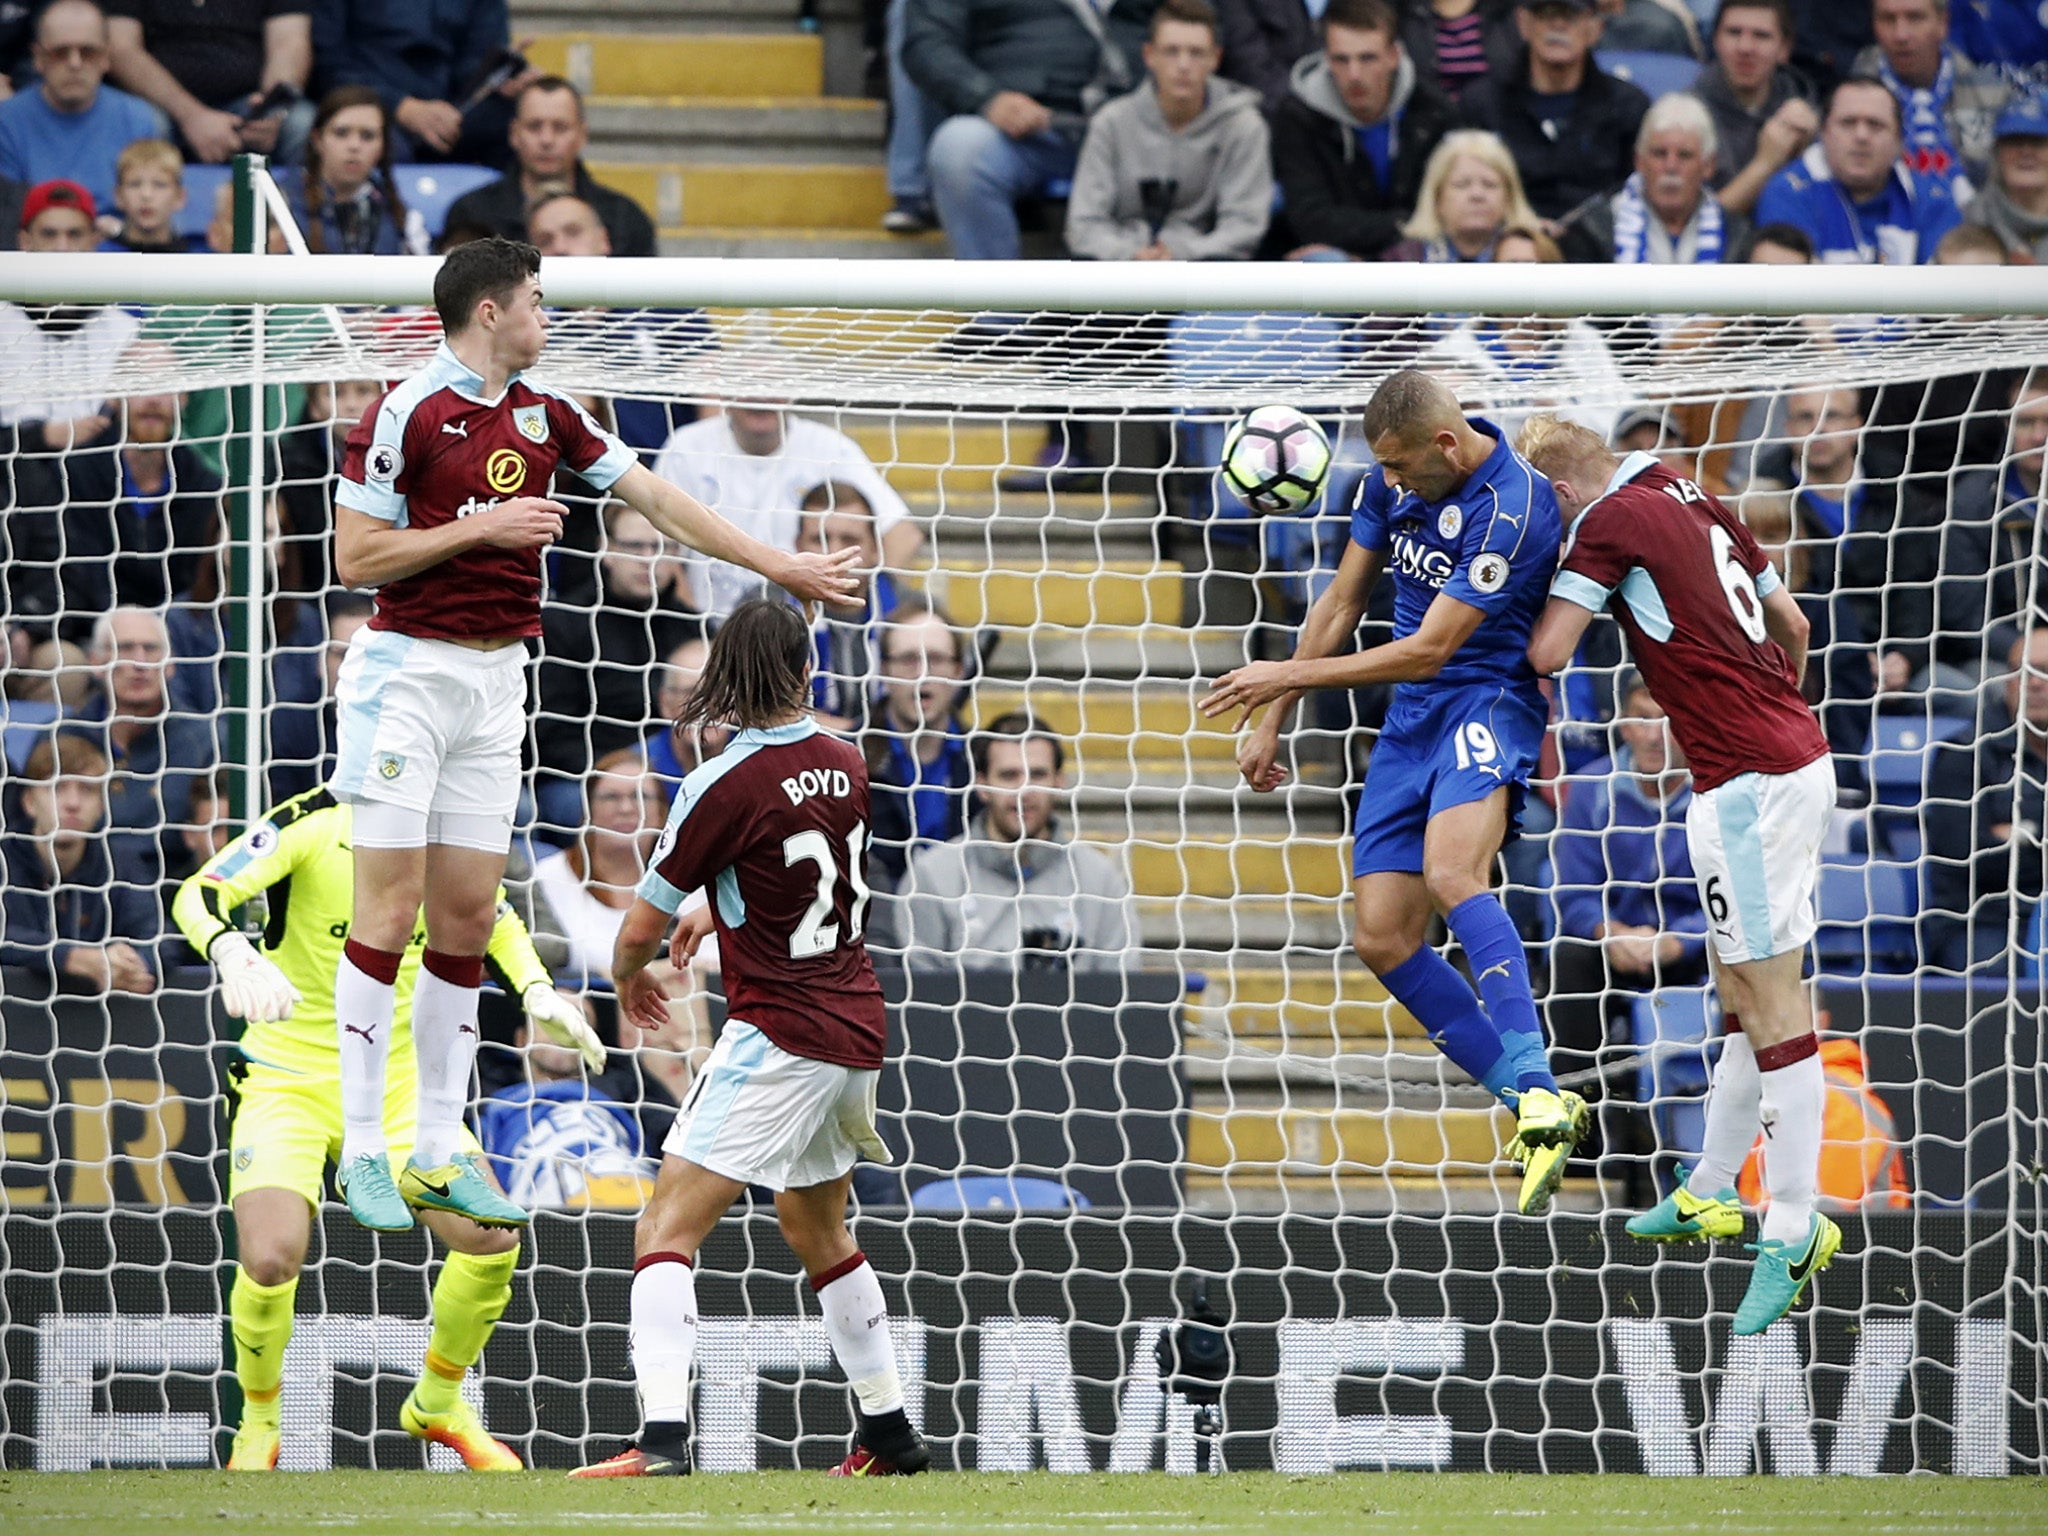 Islam Slimani rose highest to open the scoring for Leicester